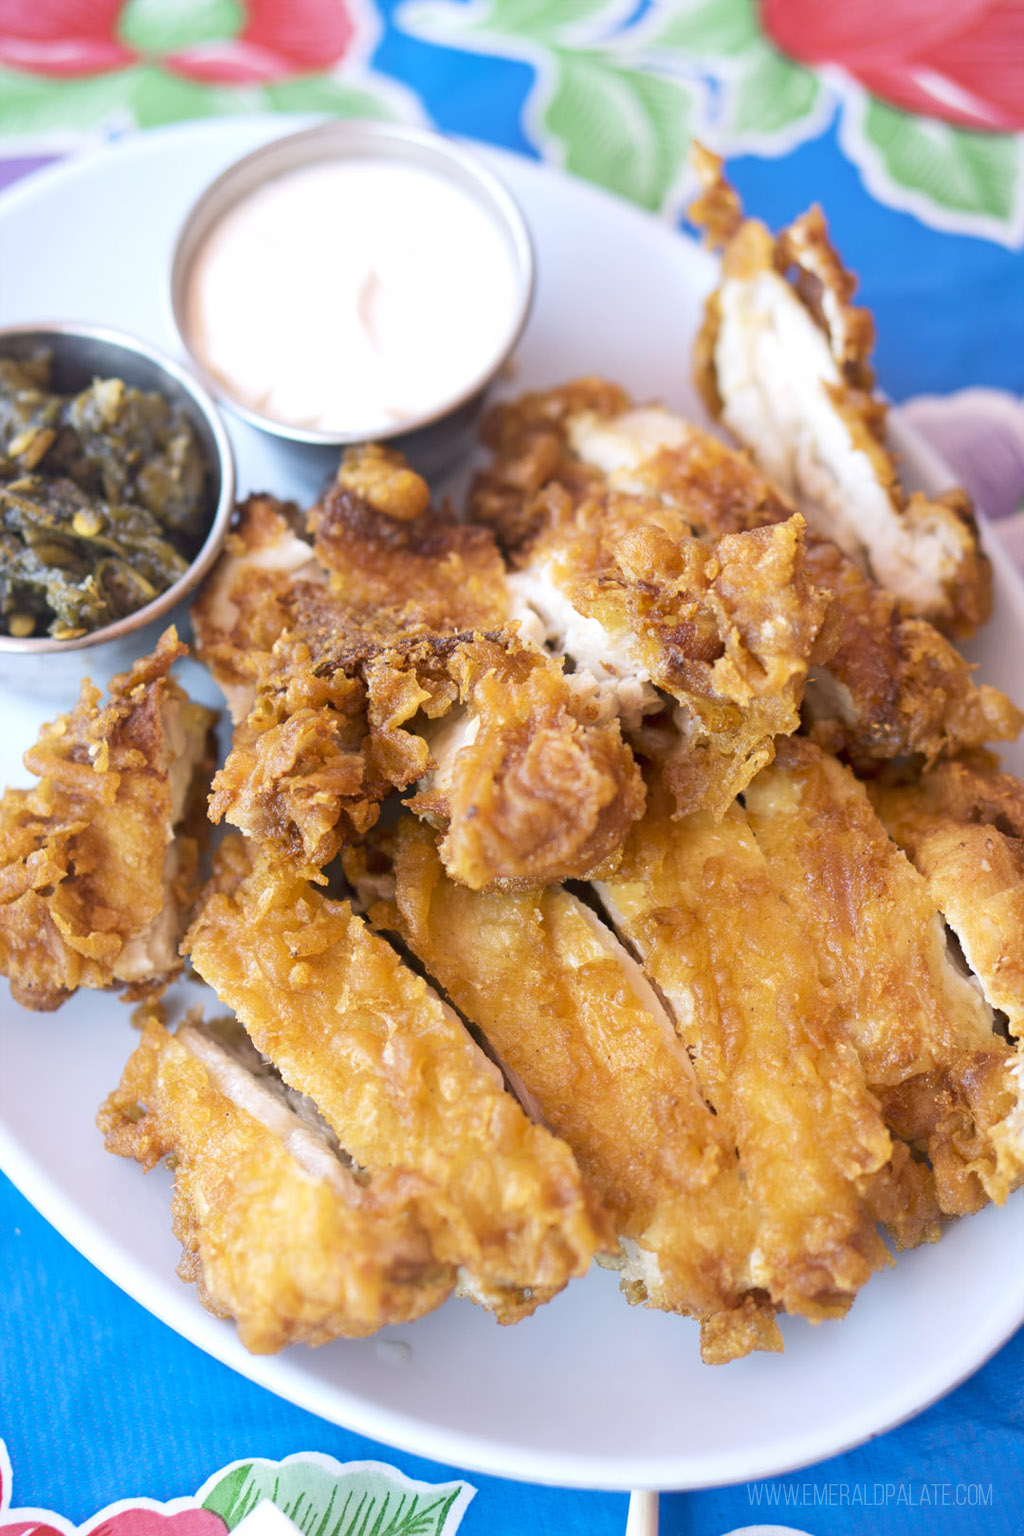 plate of fried chicken on a colorful plastic table cloth